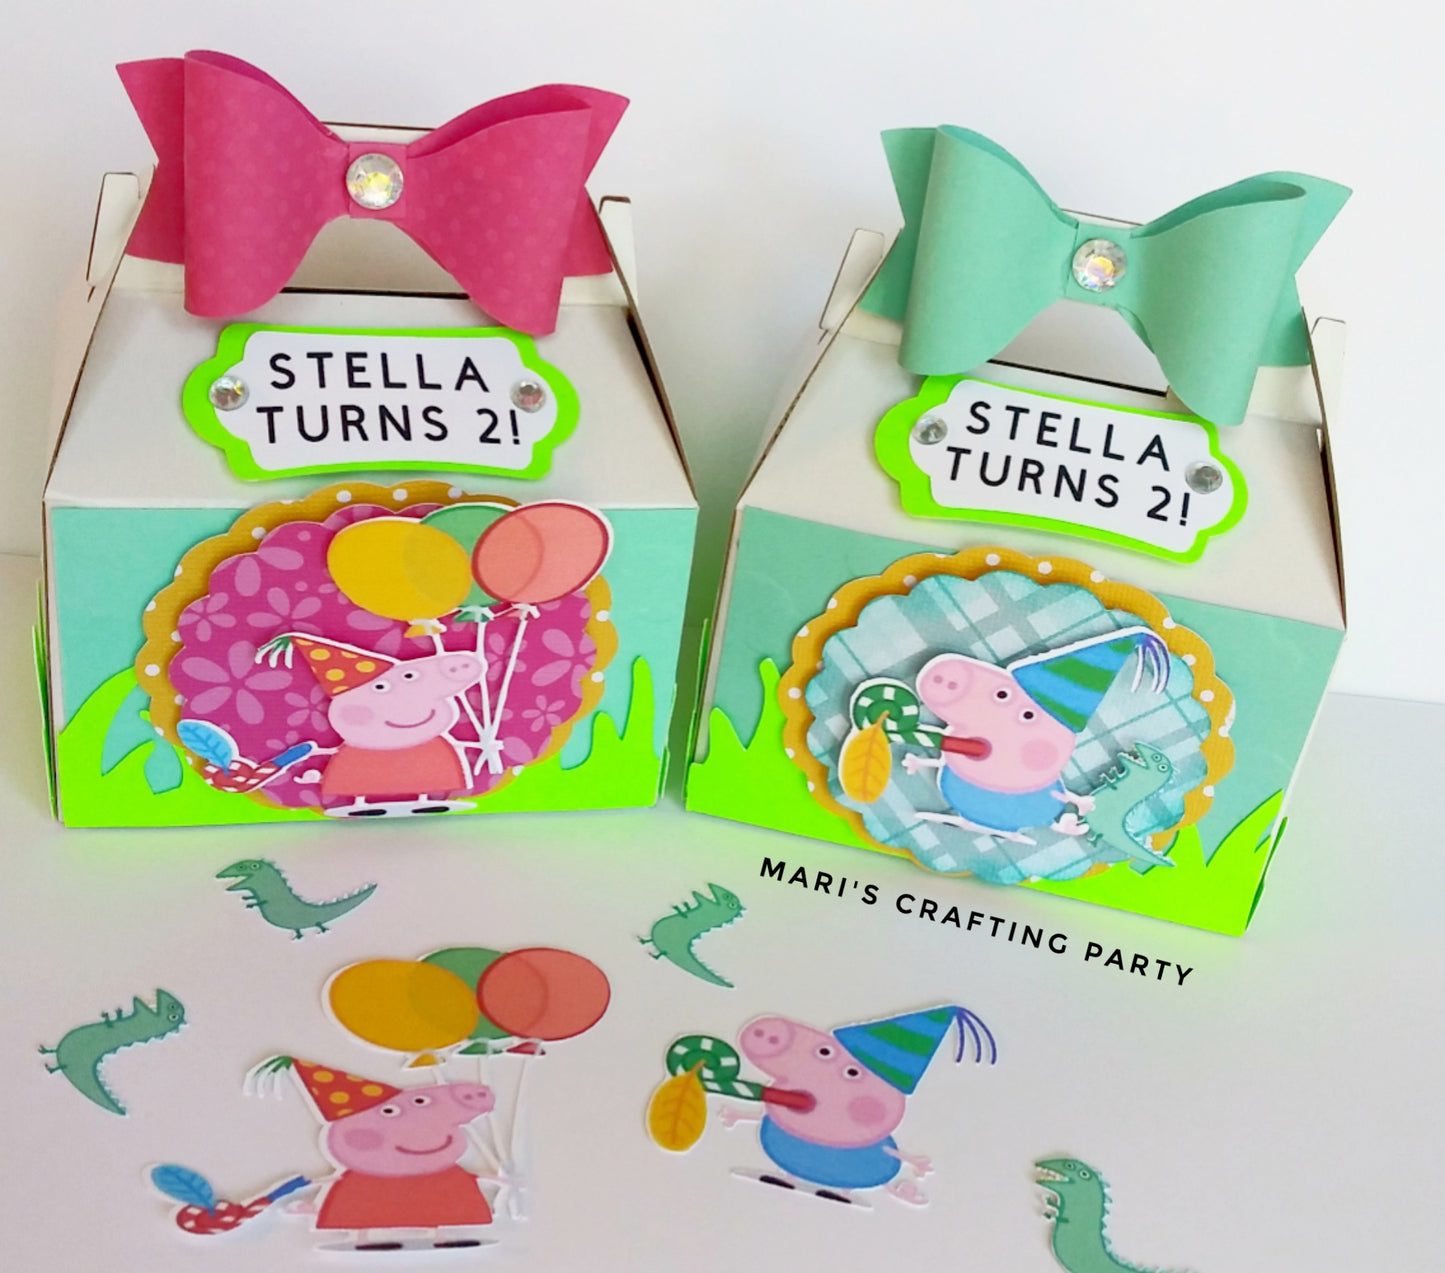 Peppa Pig Favor Boxes